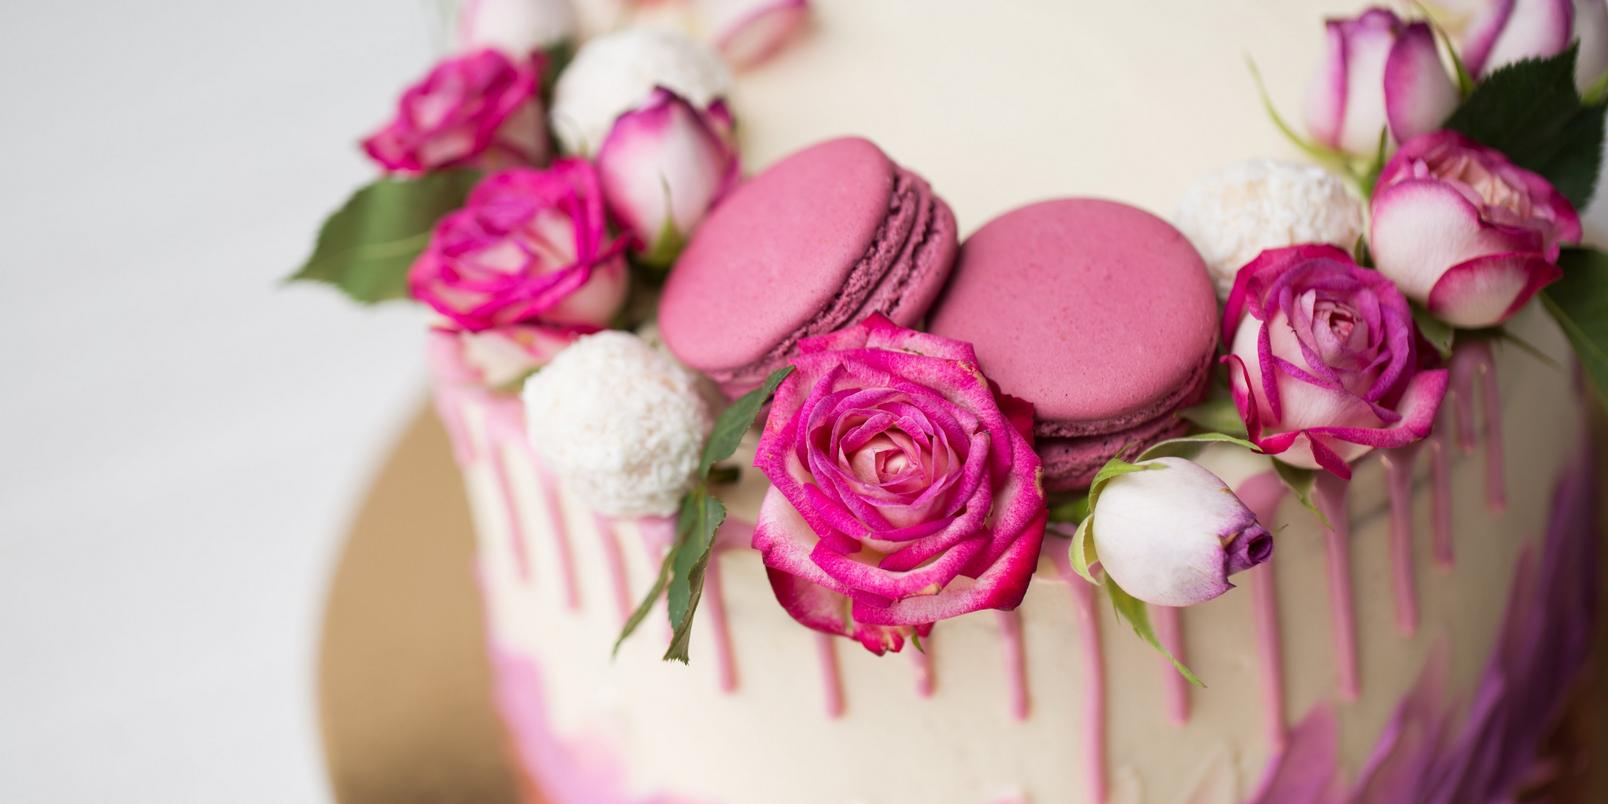 Flowers-and-macroons-cake